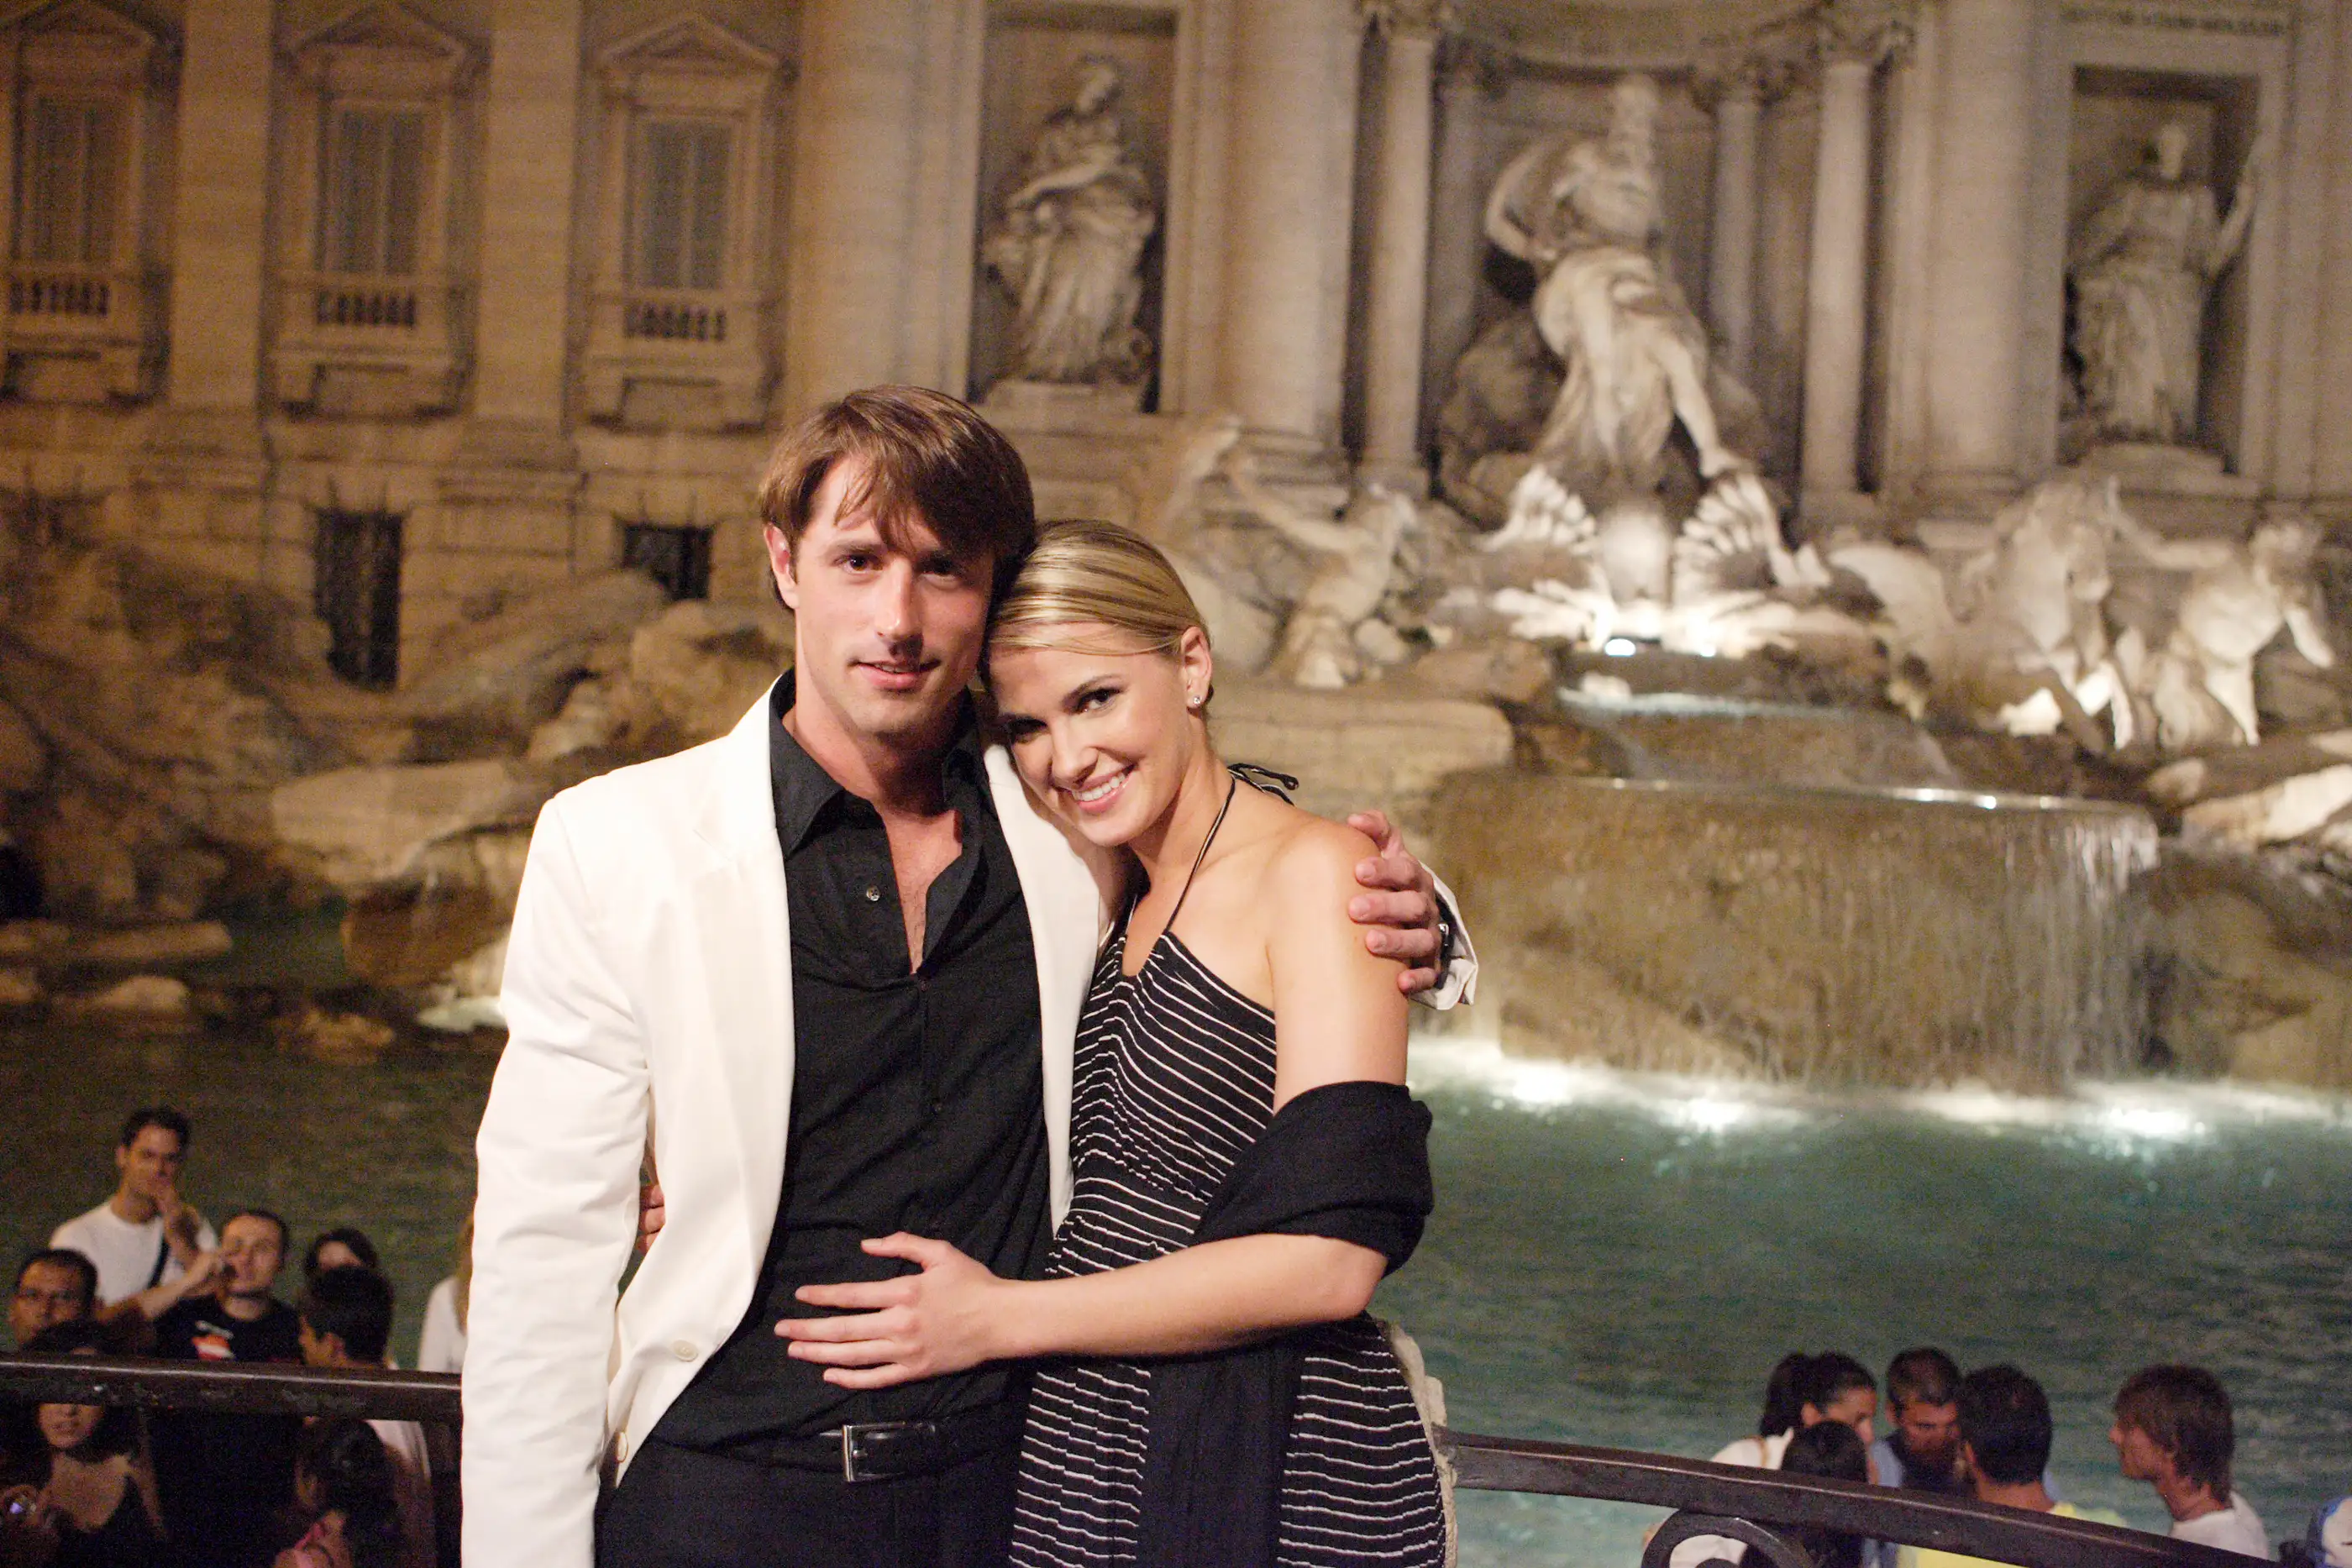 THE BACHELOR: ROME - &quot;Episode 904&quot; - Lorenzo shares a private dinner with Jennifer in front of the Vatican, which also happens to have the Borghese name on its faÂade. Then they take a romantic carriage ride to the famous Trevi Fountain, on &quot;The Bachelor: Rome,&quot; MONDAY, OCTOBER 23 (9:00-10:00 p.m., ET) on ABC.